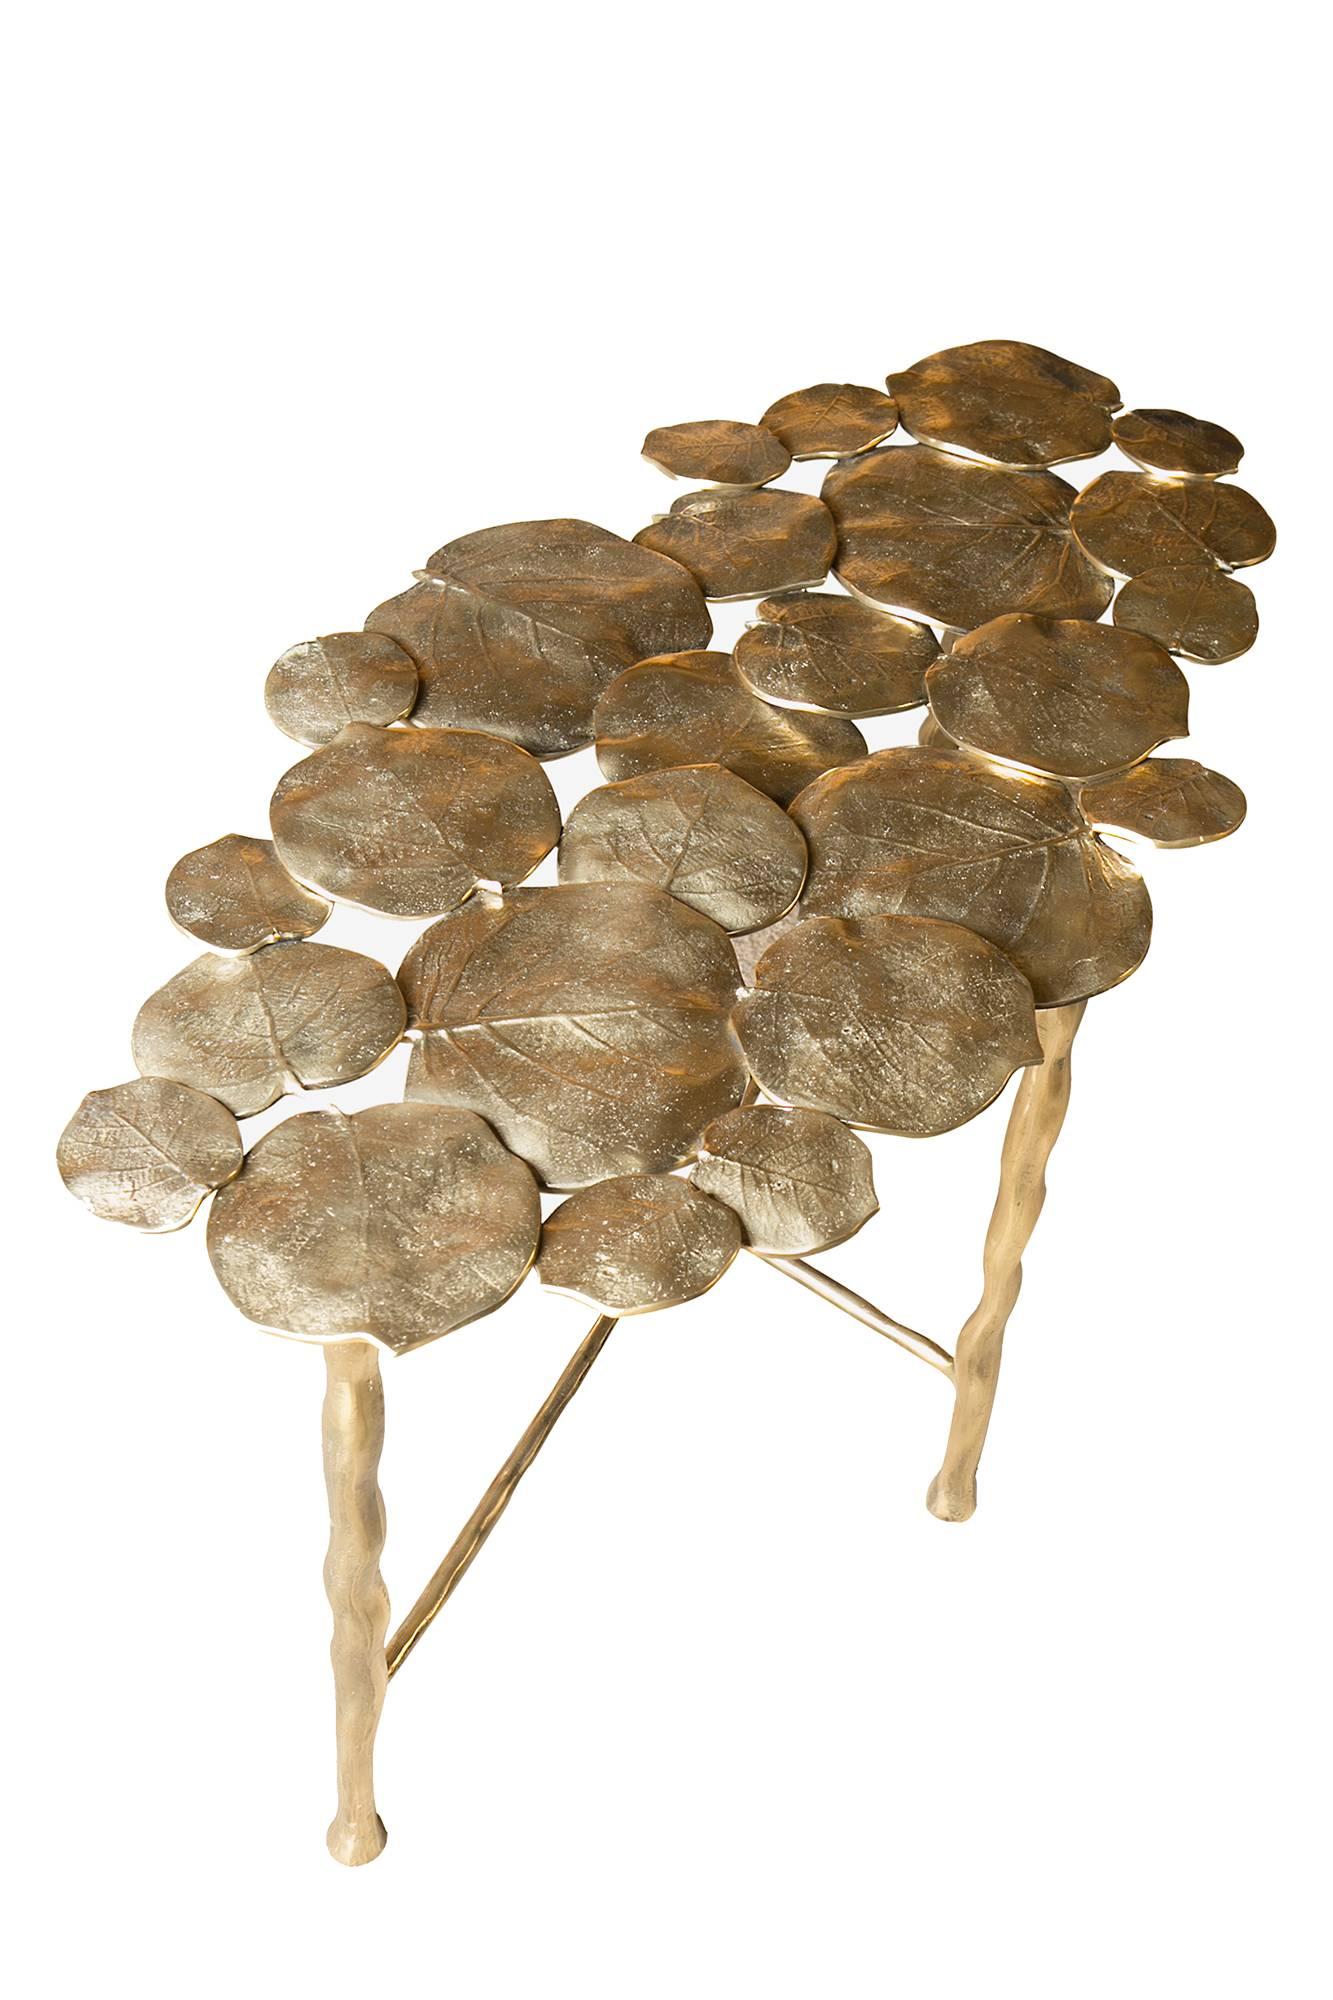 Decorative oval side table made in France. A unique cocktail or occasional table consisting of individually moulded cast brass leaves with brass legs.